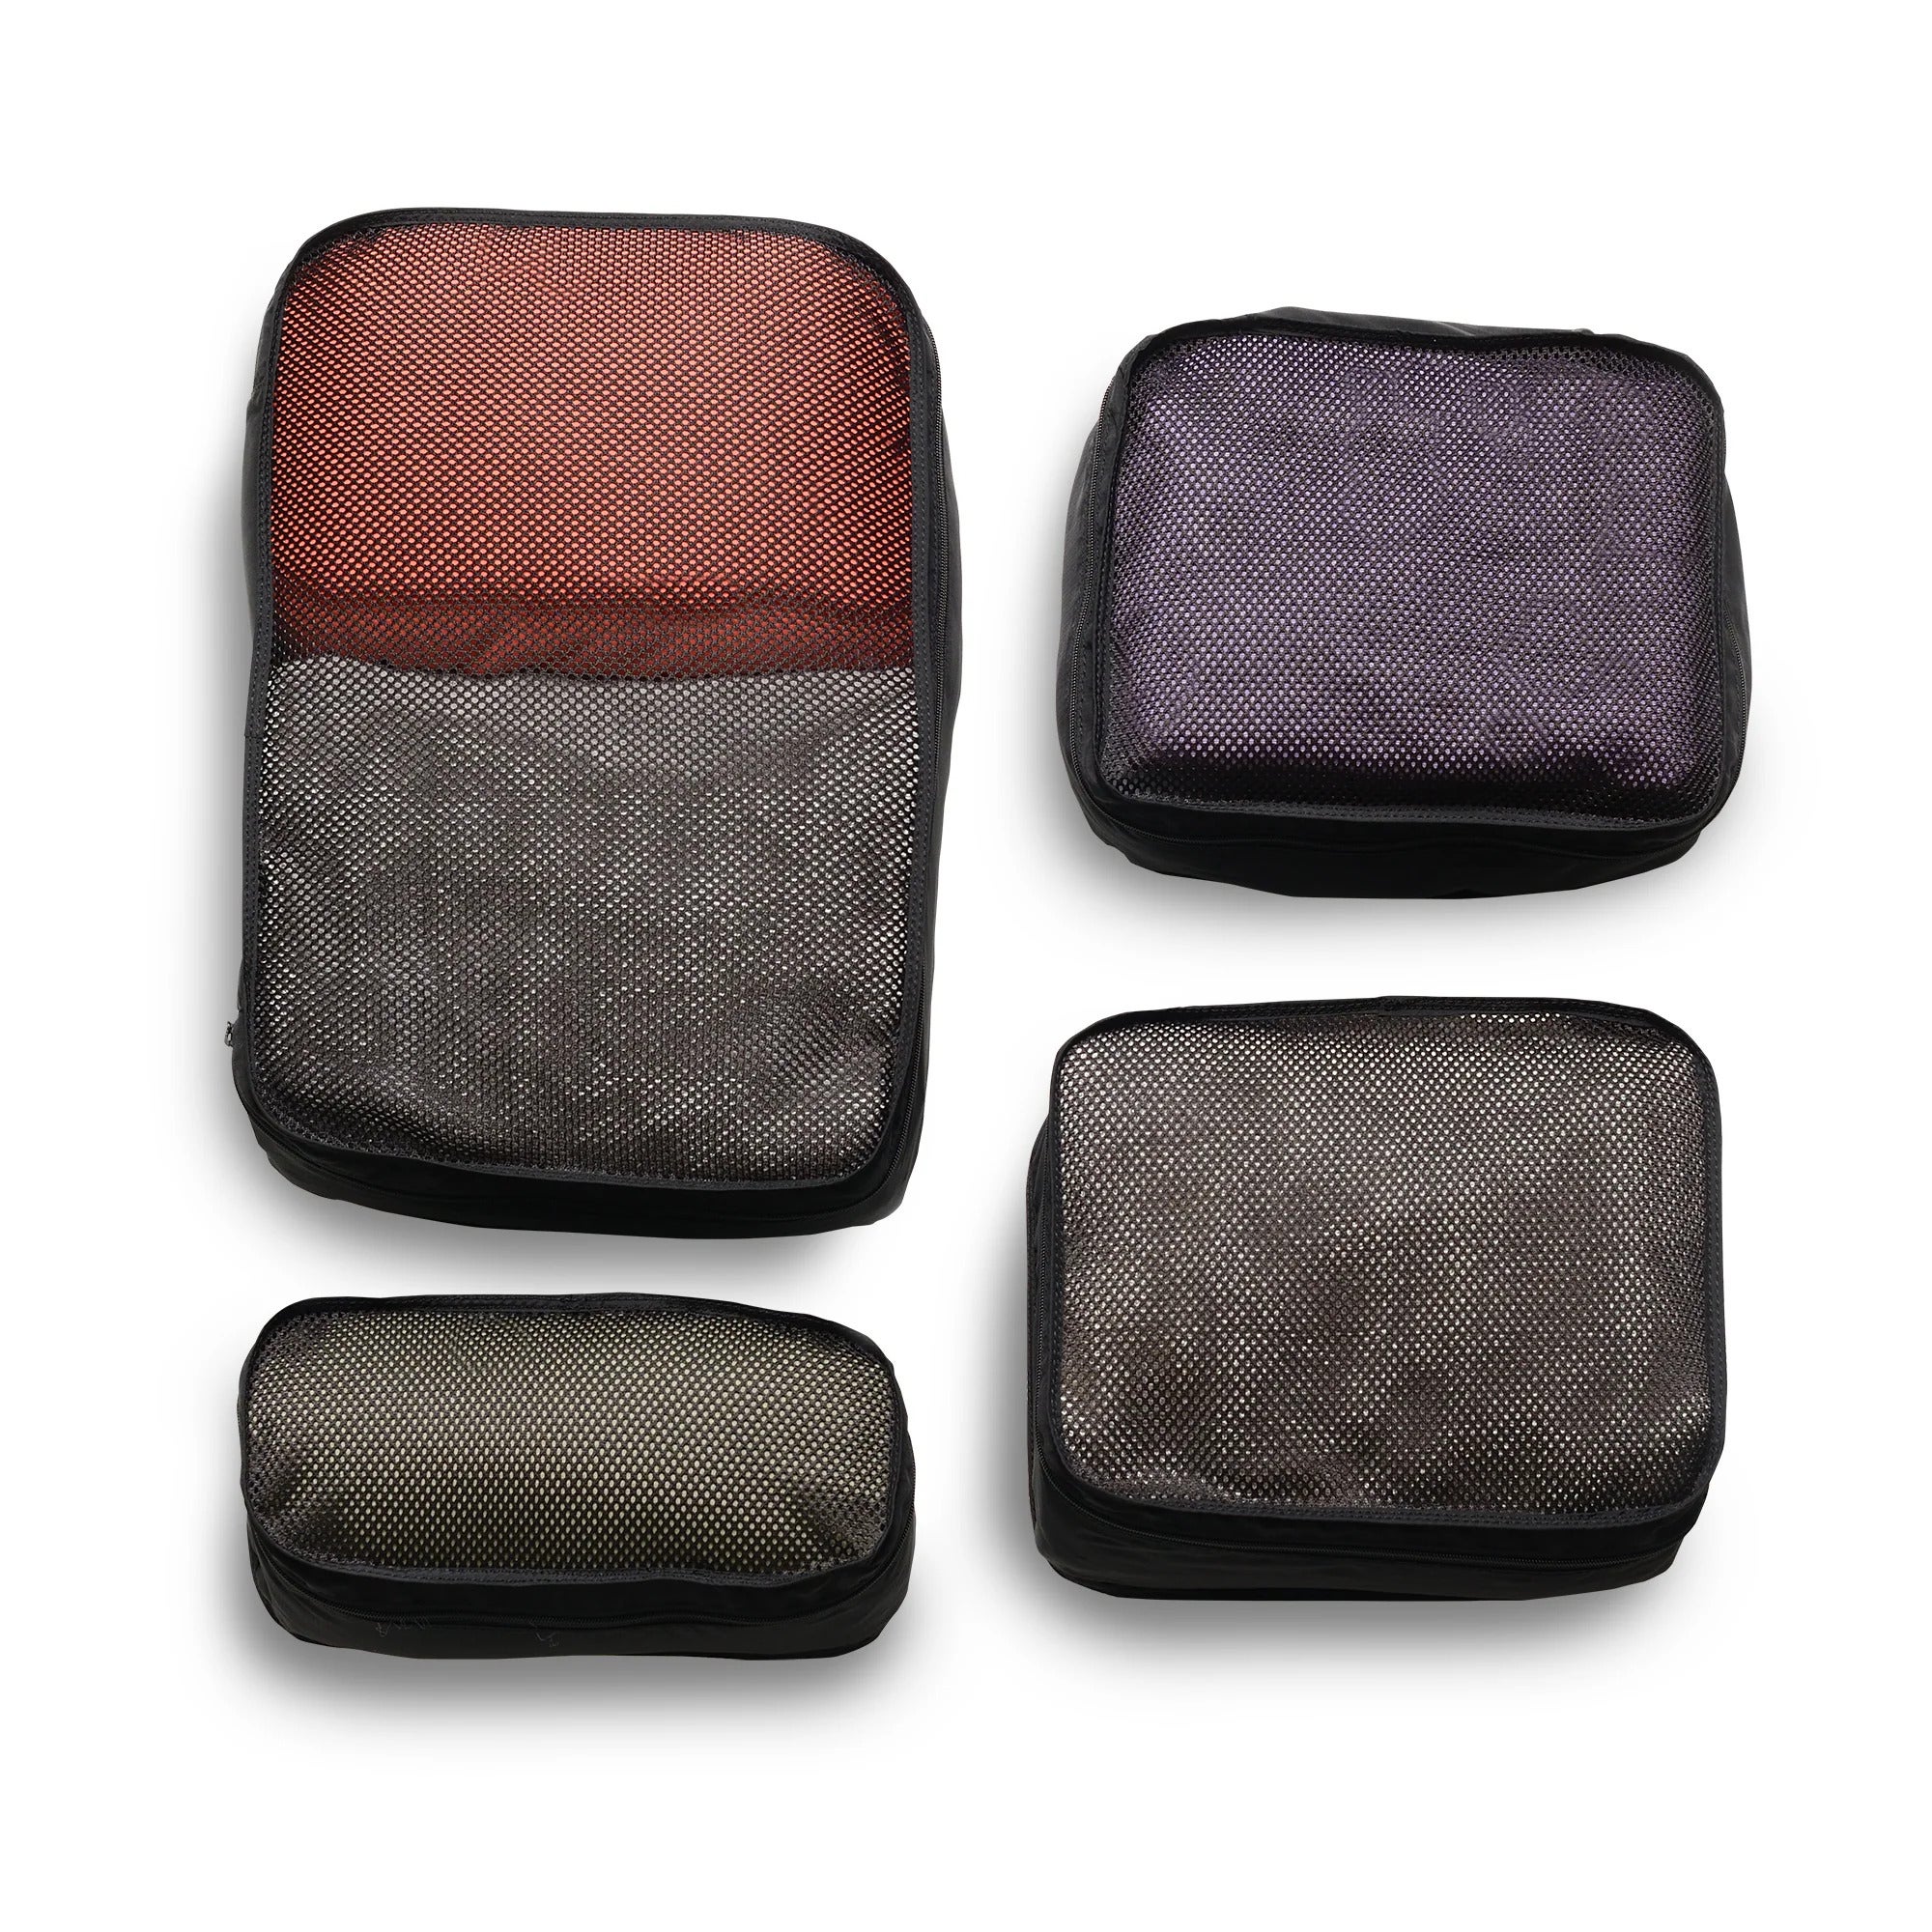 Set of 4 packing cubes